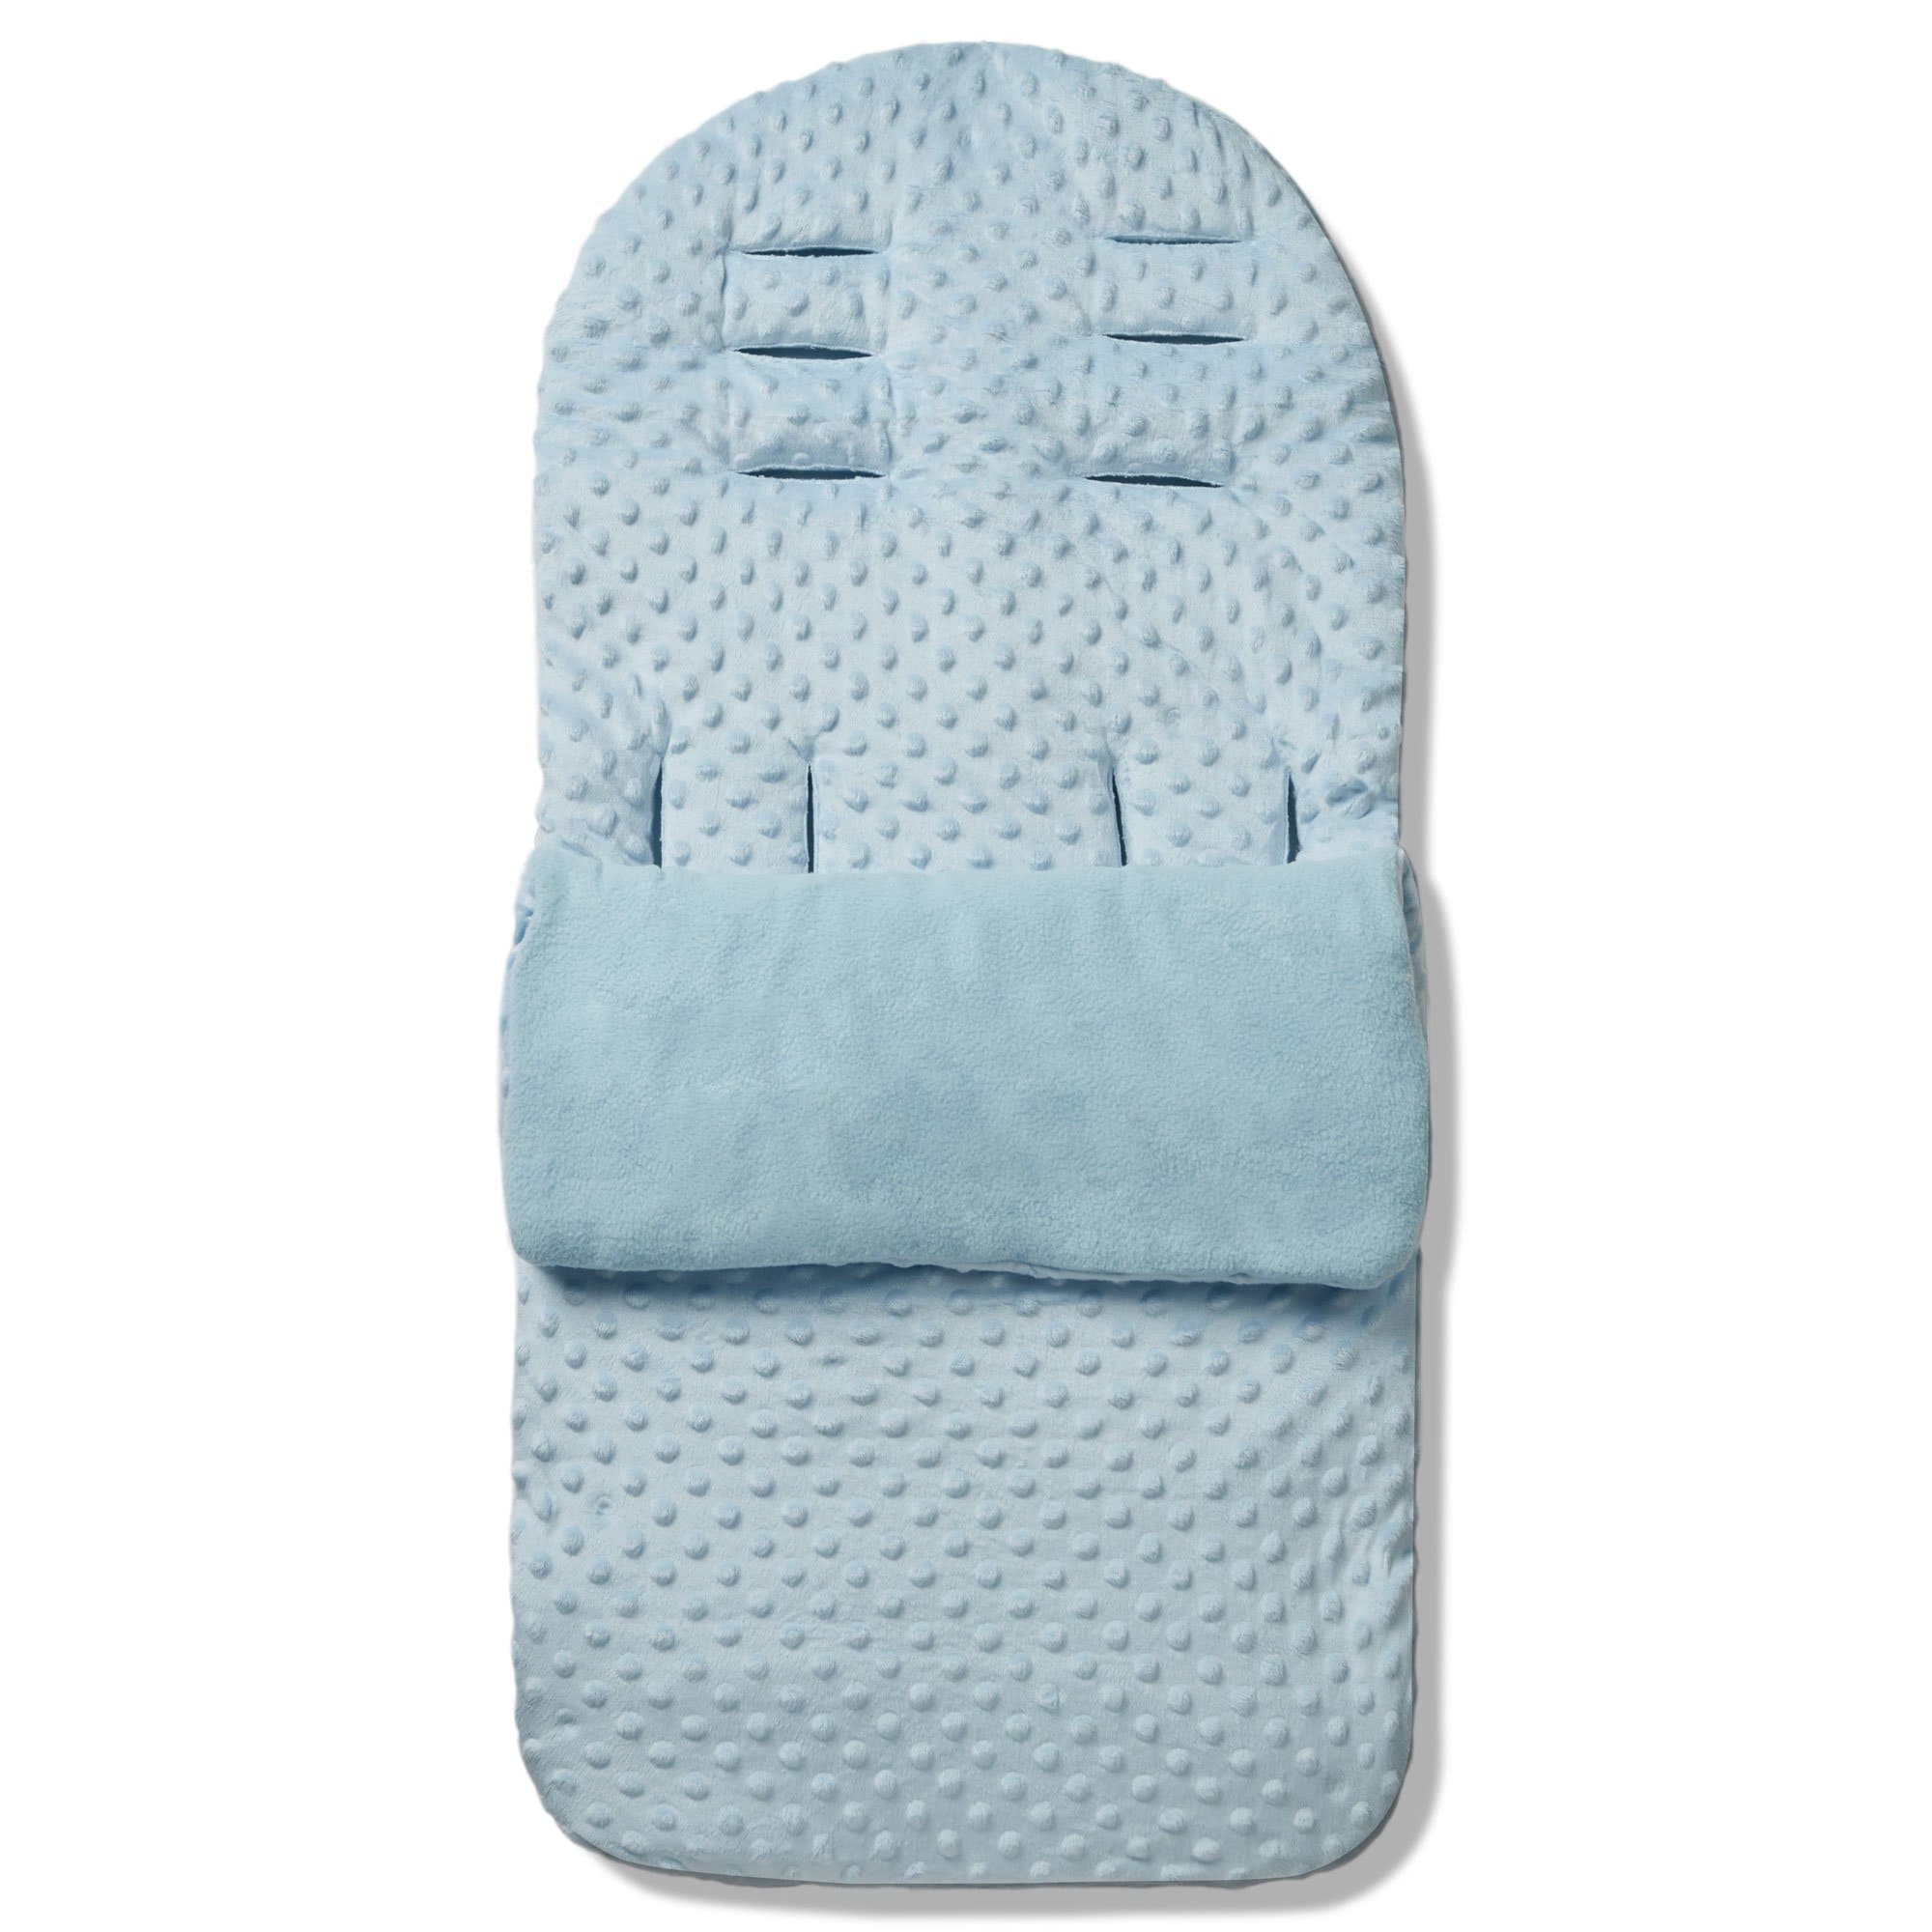 Dimple Footmuff / Cosy Toes Compatible with Britax - Blue / Fits All Models | For Your Little One